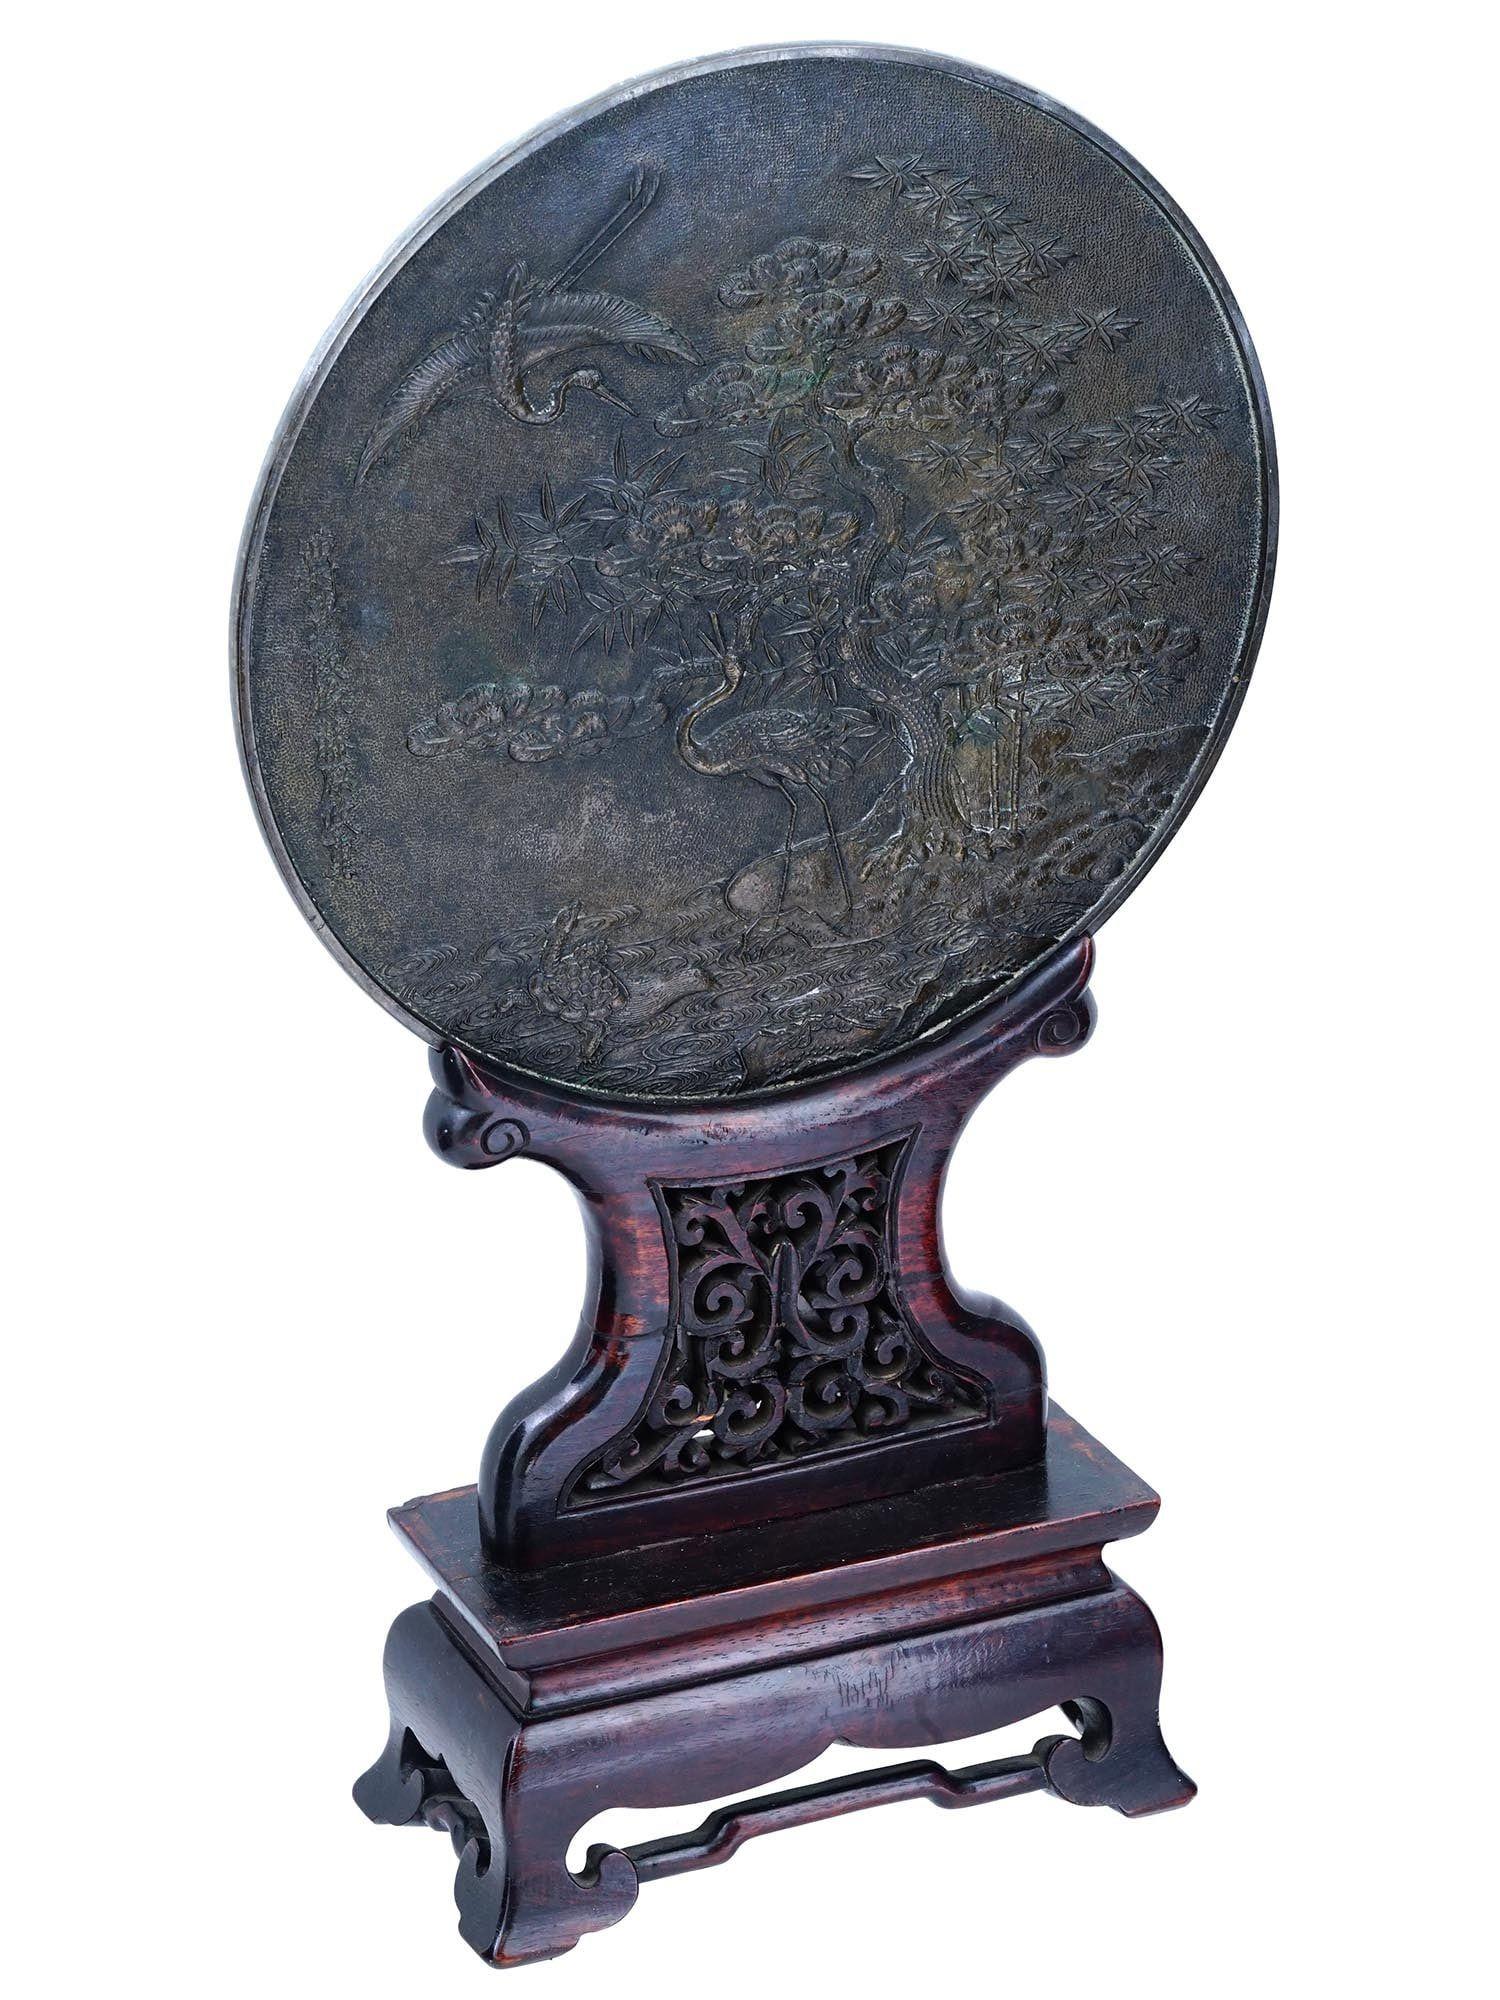 Antique (late 19th century) circular patinated bronze table screen depicting stylized standing crane in a lush setting with crane in flight above, mounted on carved openwork wooden stand, depicting.  Signed.  With silvered rear for use as a mirror.